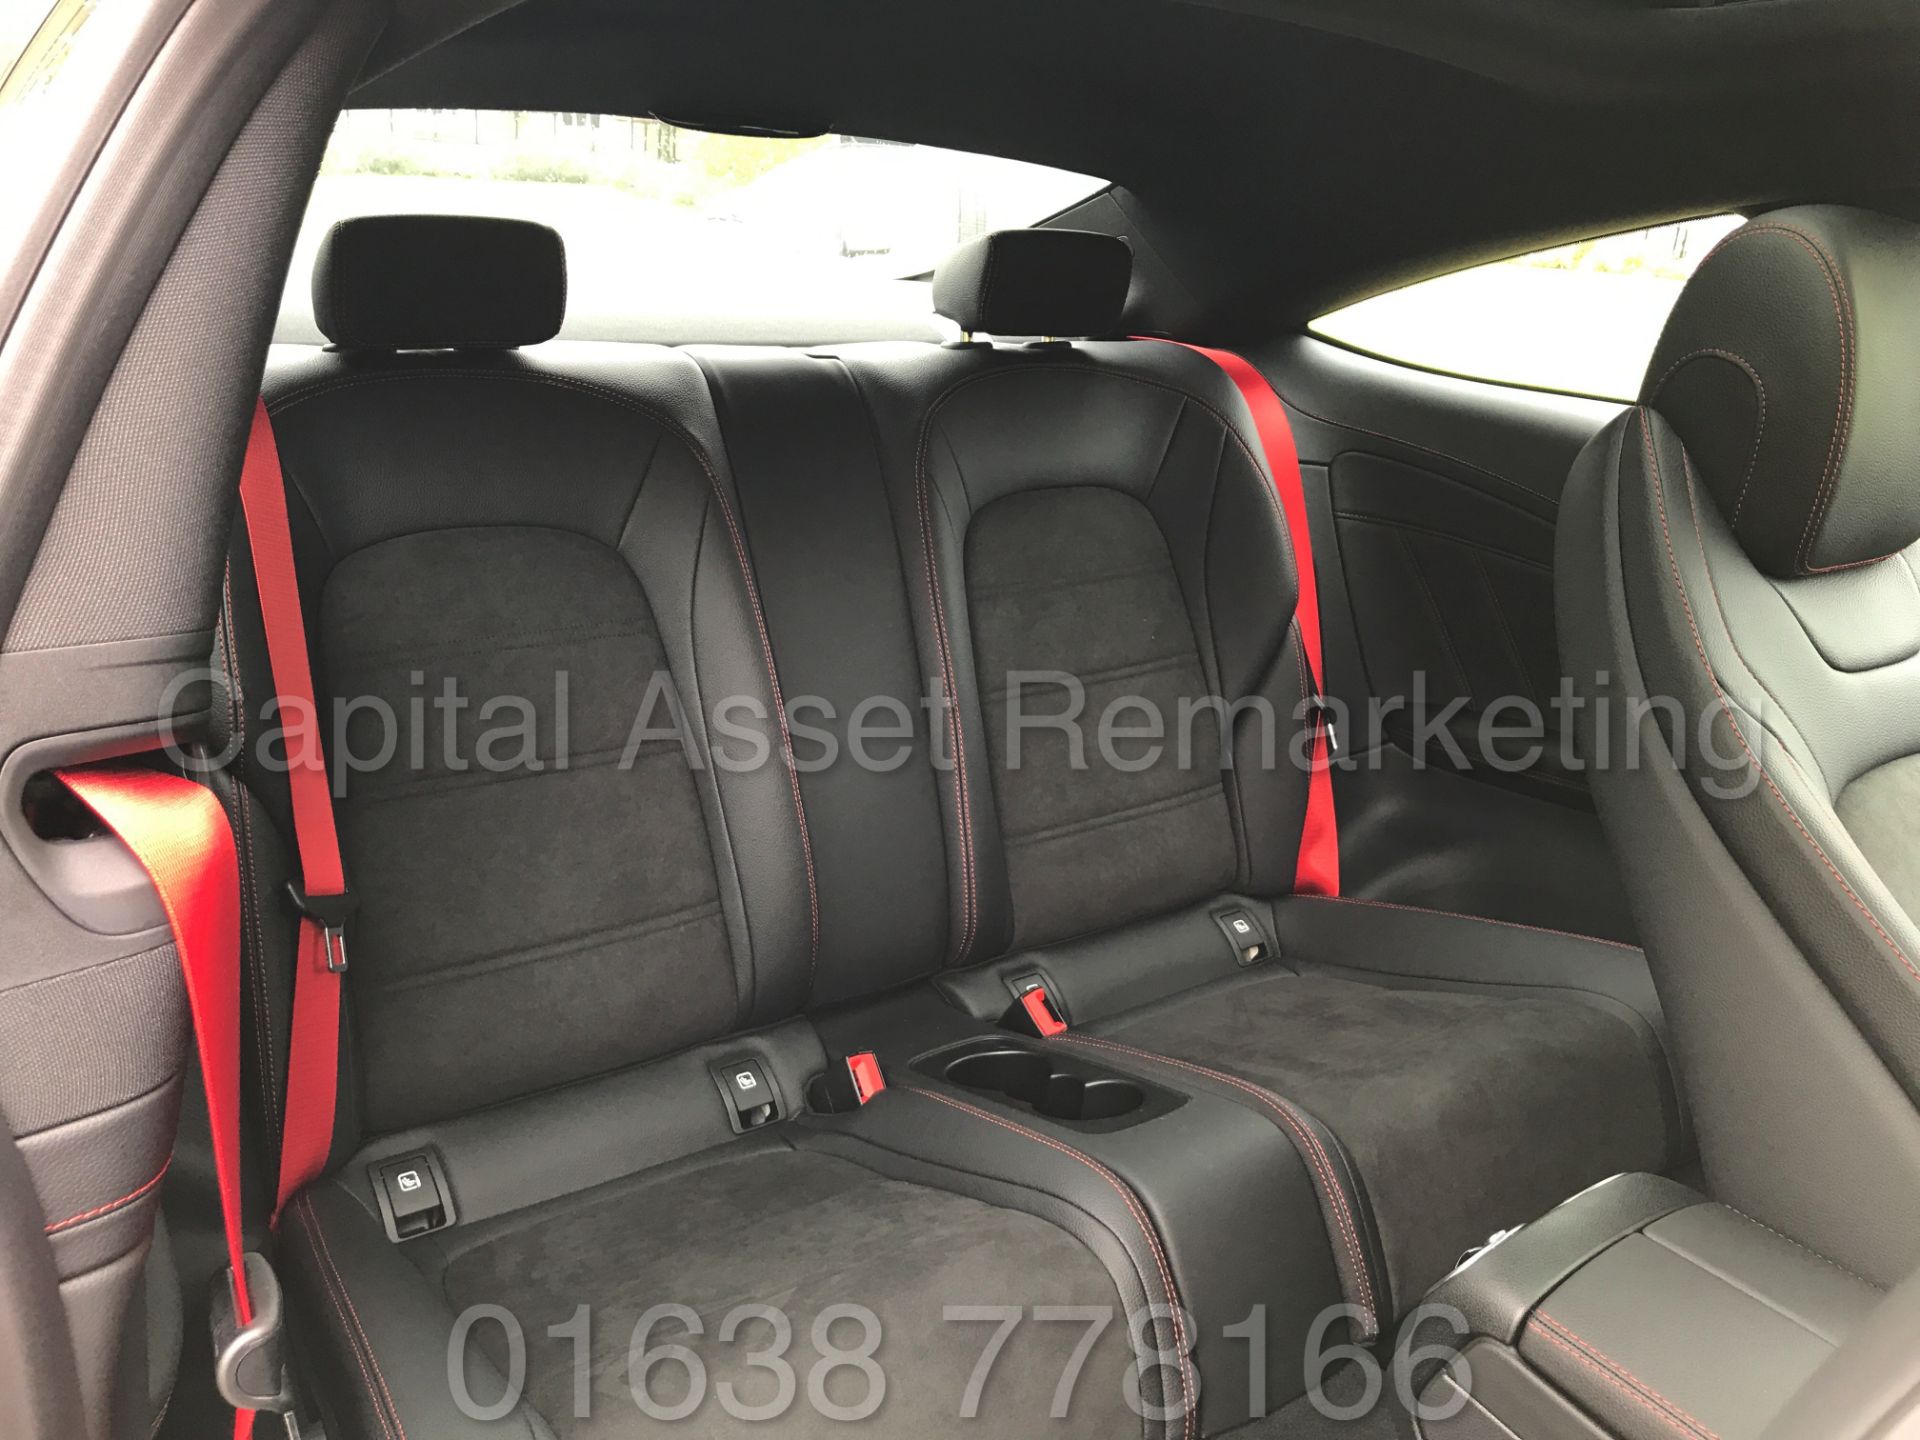 MEREDES-BENZ C43 AMG PREMIUM '4 MATIC' COUPE (2017) '9-G AUTO - LEATHER - SAT NAV' **FULLY LOADED** - Image 36 of 57